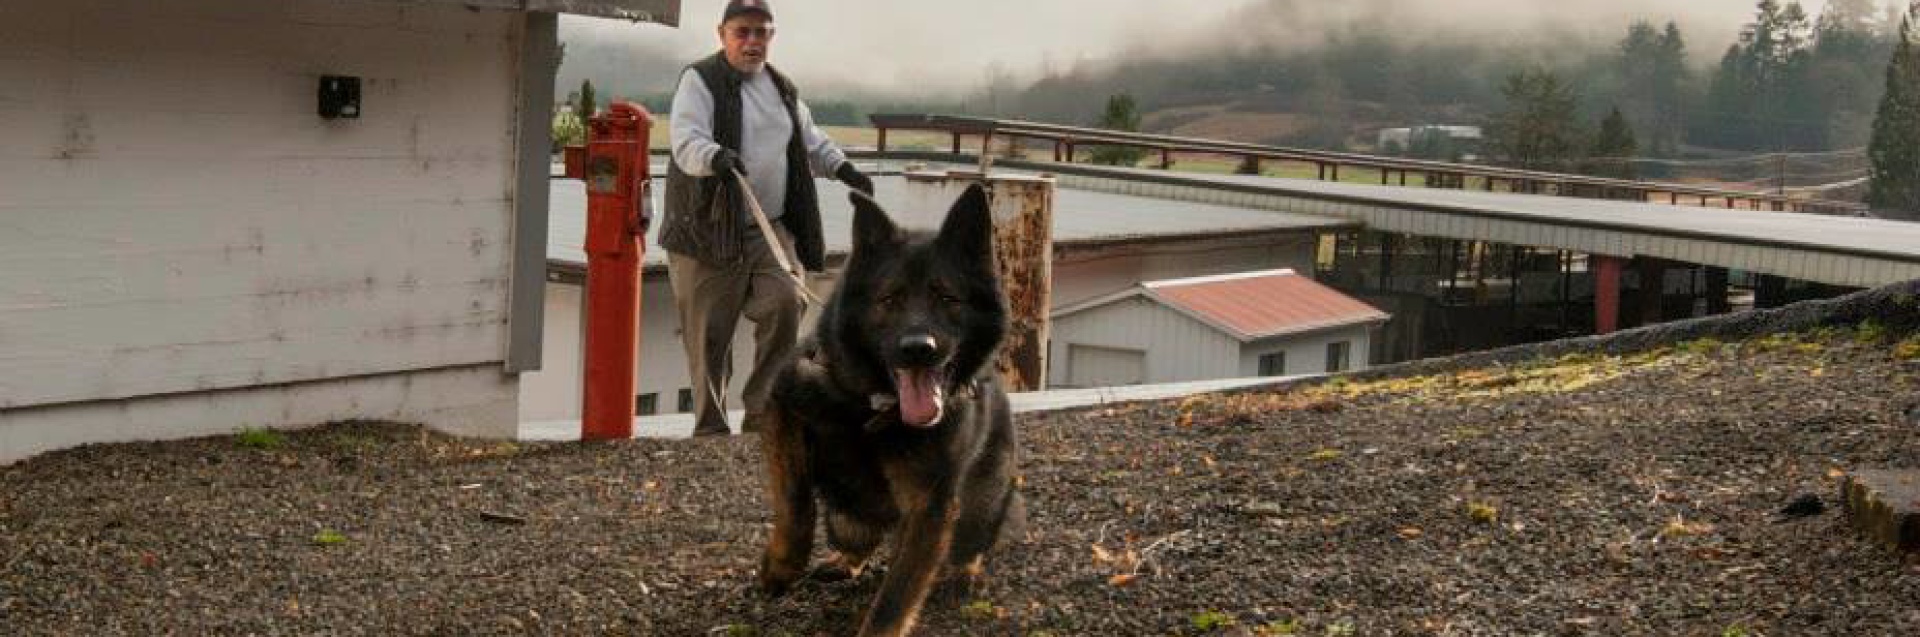 King County Search Dogs